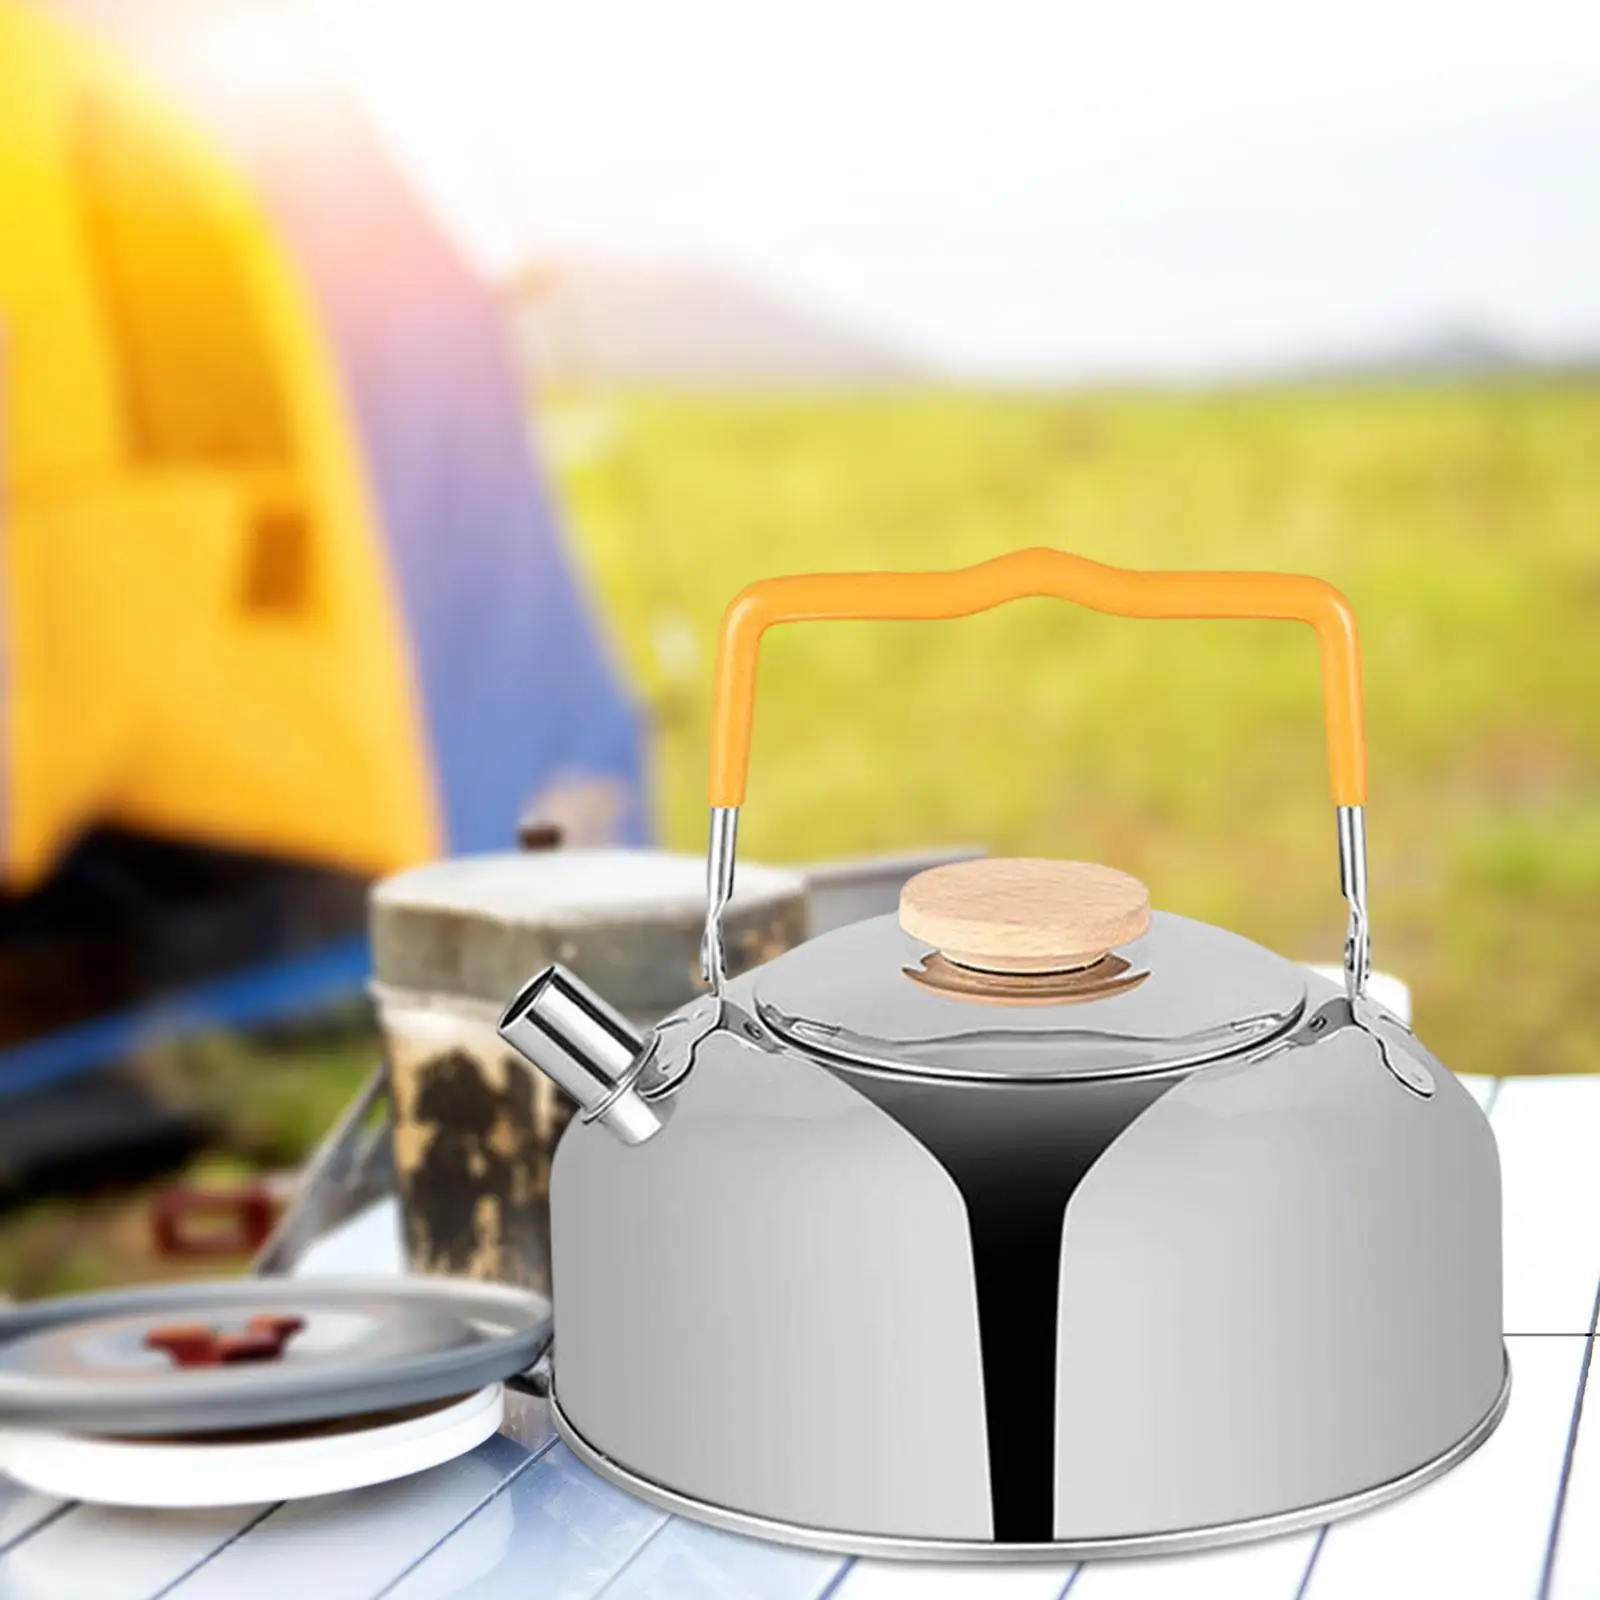 Water Boiler Teapot Coffee Pot Anti Scald Handle Kitchenware Teakettle Camping Water Kettle for Travel Fishing Boiling Water